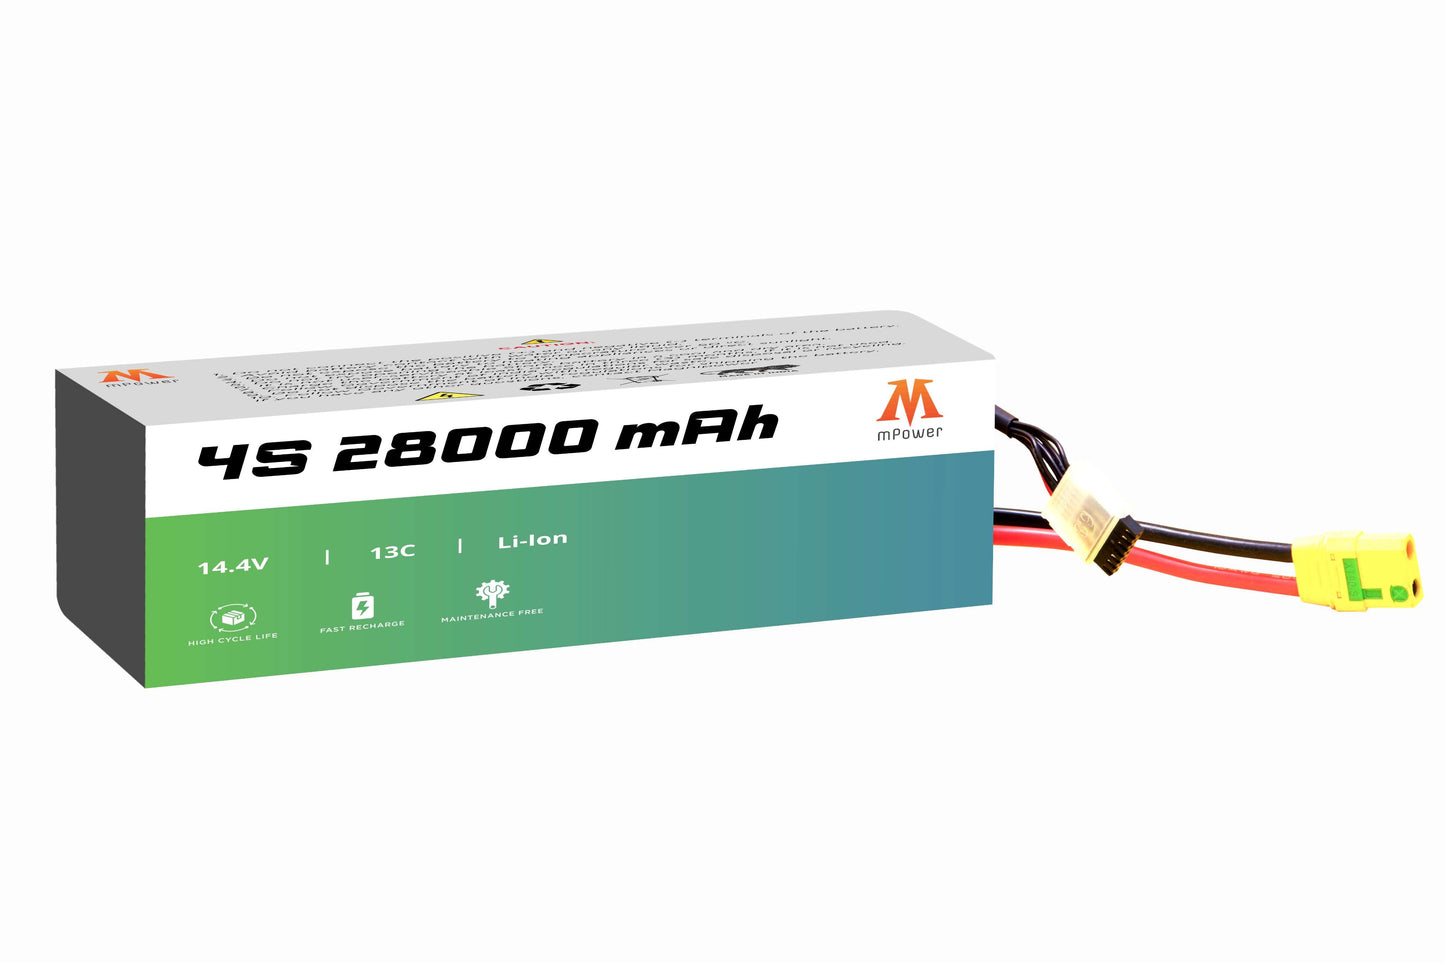 mPower 4S 28000mAh Lithium-Ion Battery for Survey Drones